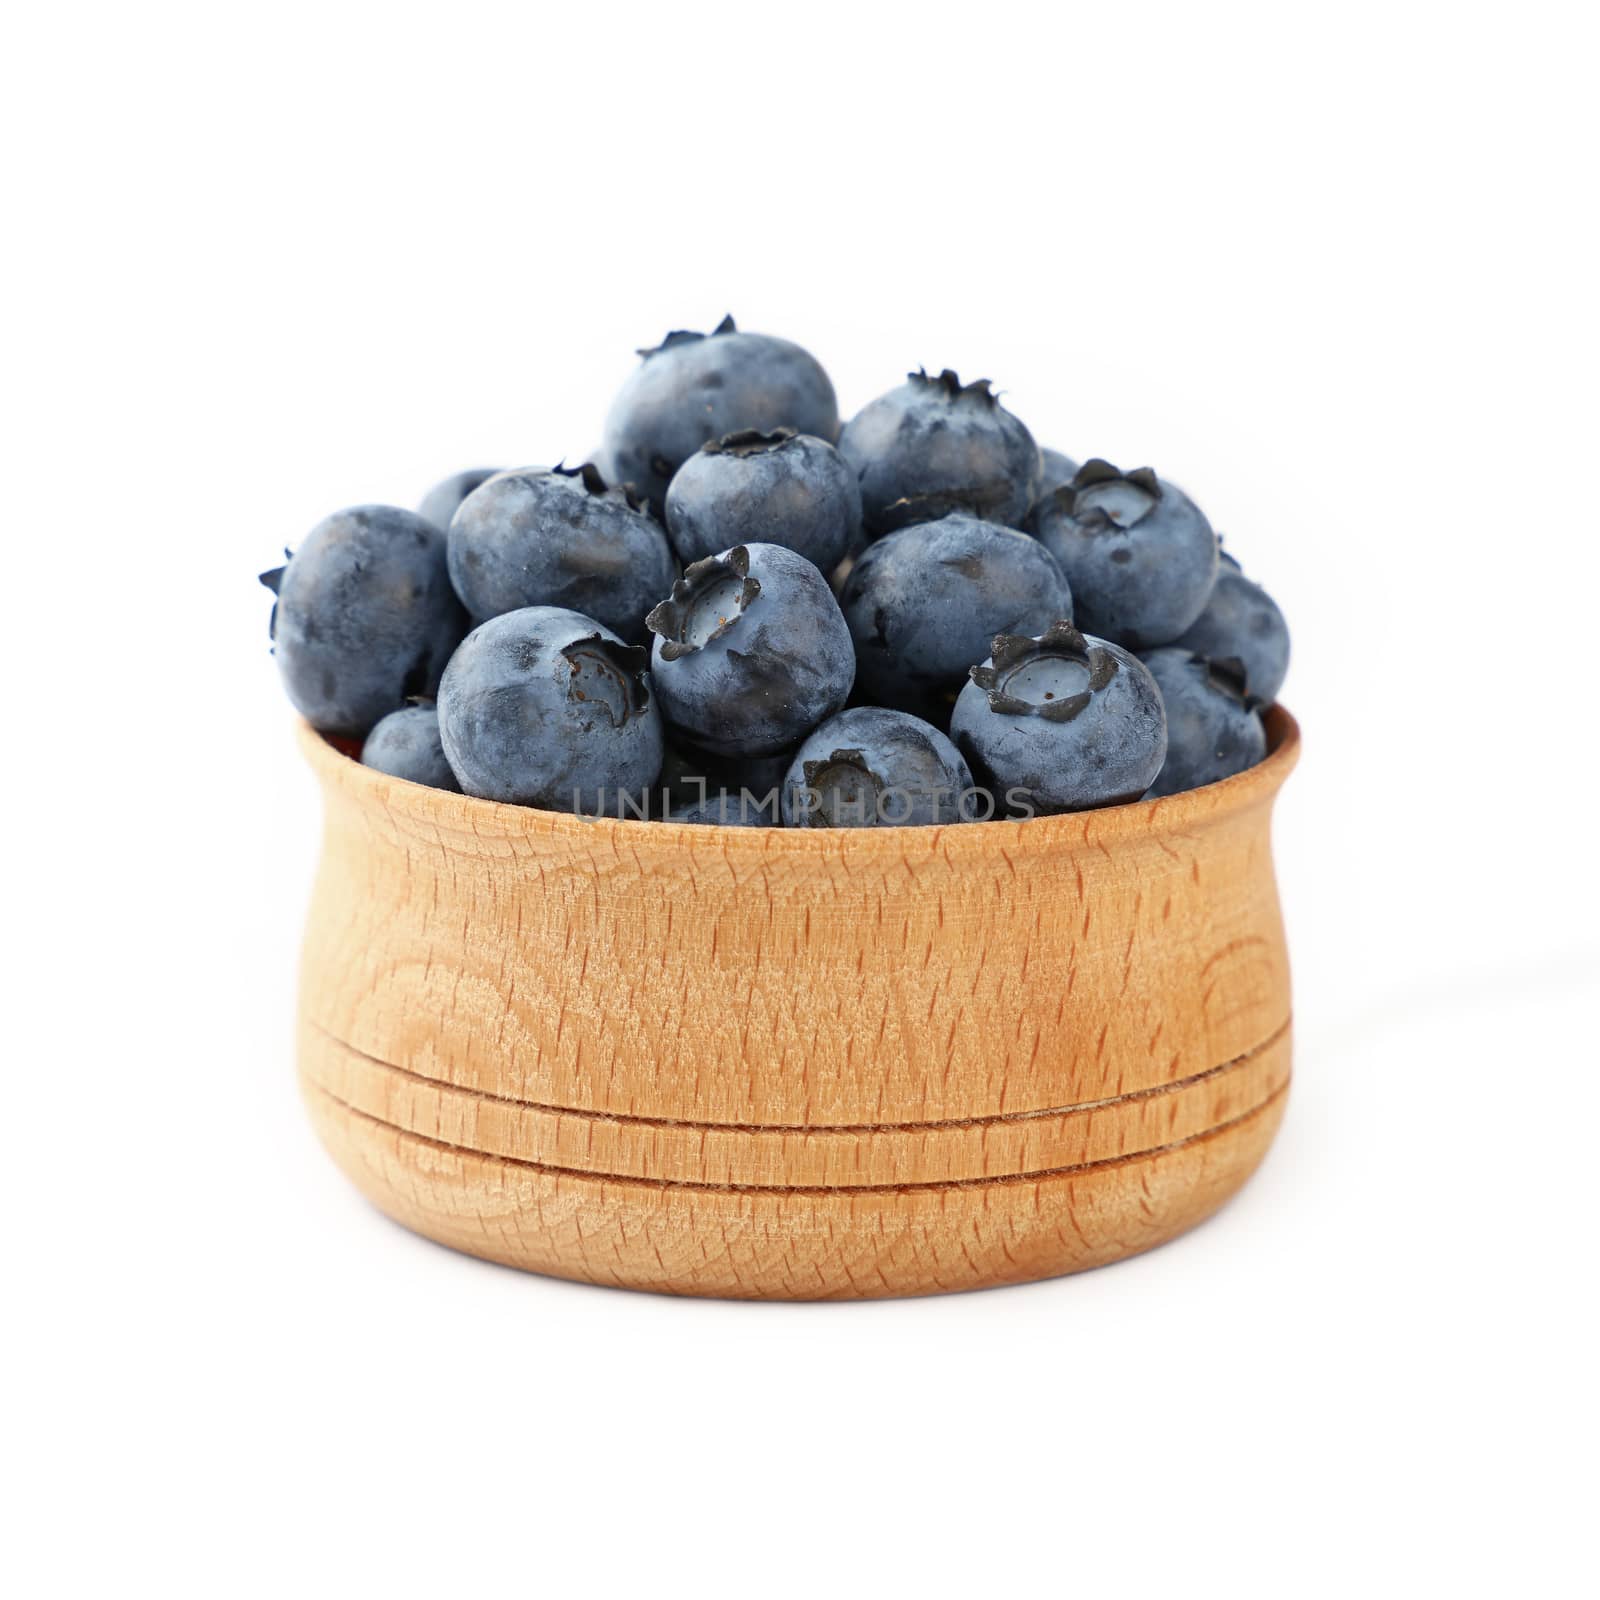 Portion of fresh blueberry berries in rustic wooden bowl isolated on white background, close up, low angle view